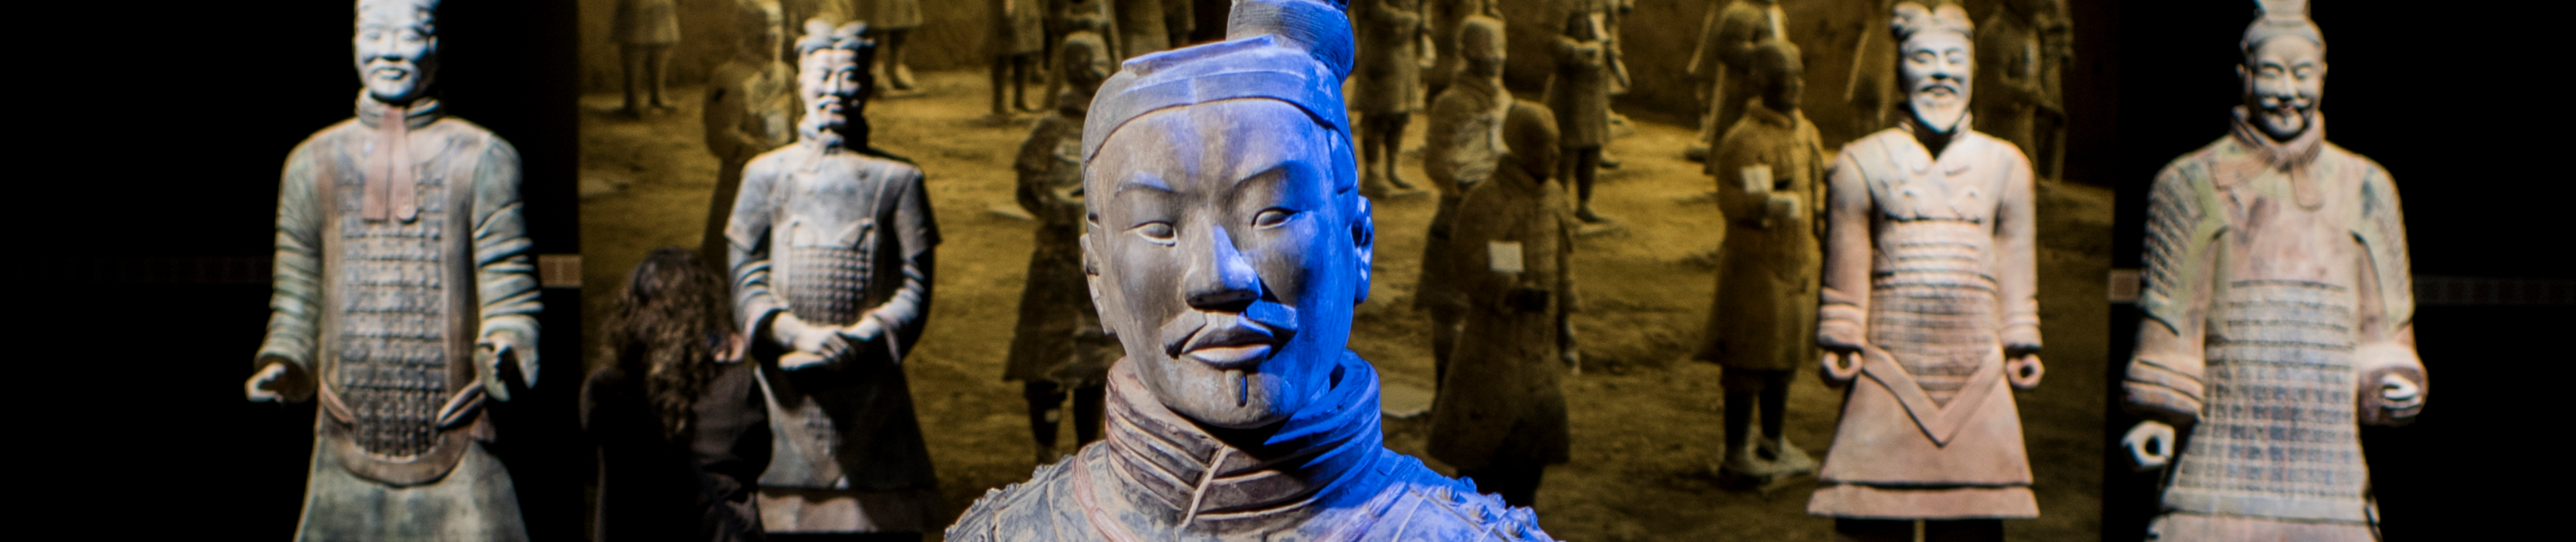 THE TERRACOTTA ARMY AND THE FIRST EMPEROR OF CHINA